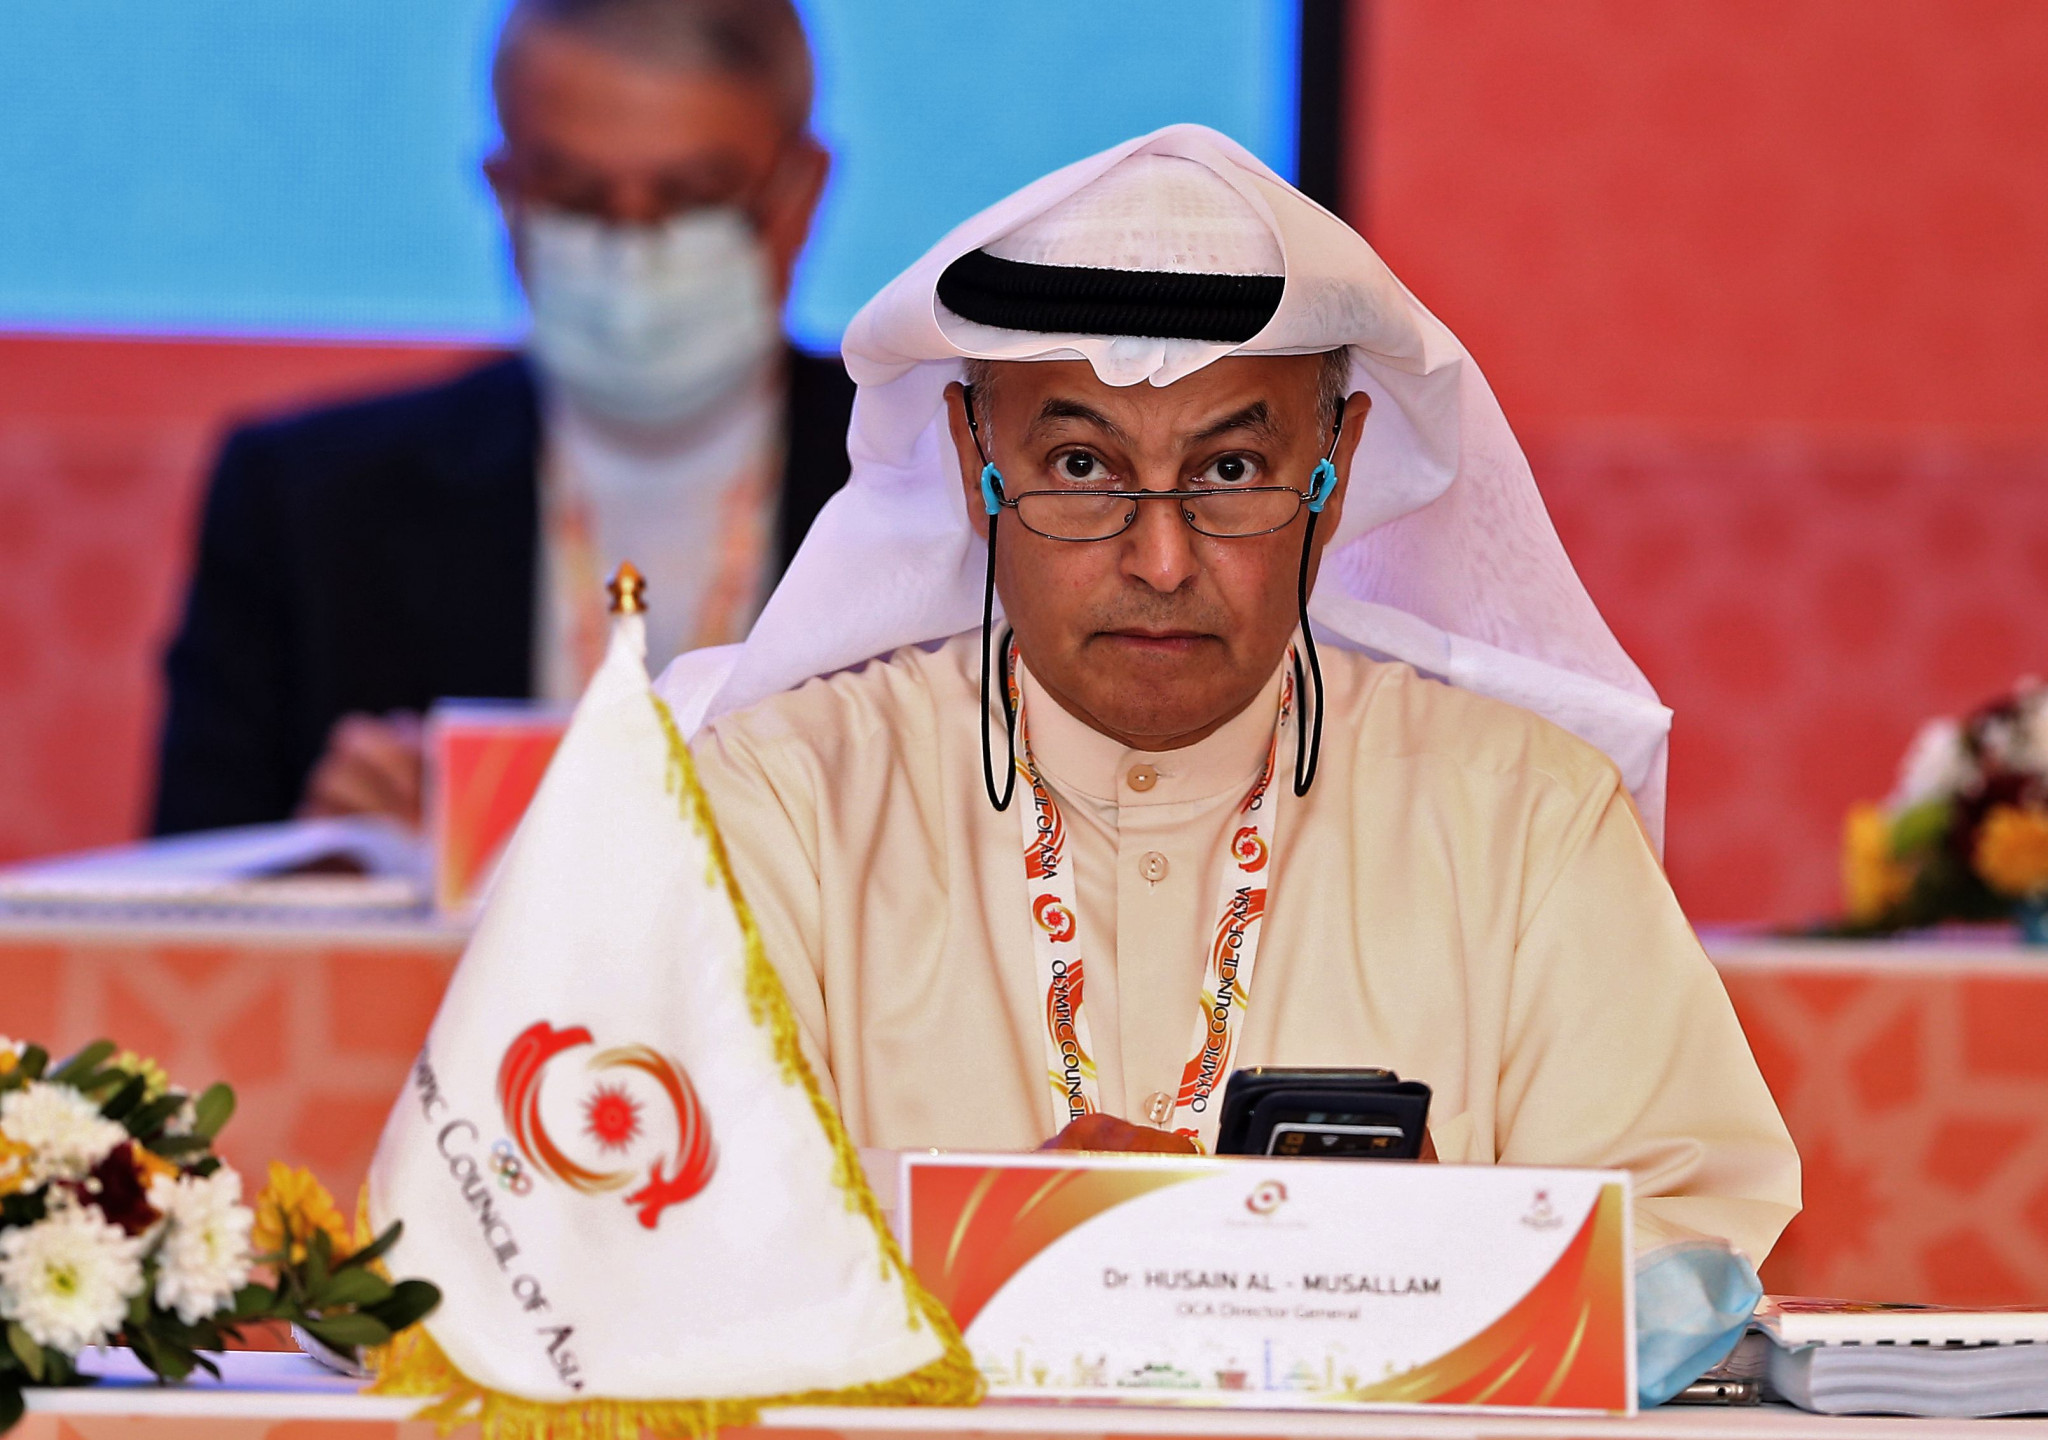 OCA director general Husain Al-Musallam highlighted that 2023 is set to be a busy year for Asian sport ©Getty Images